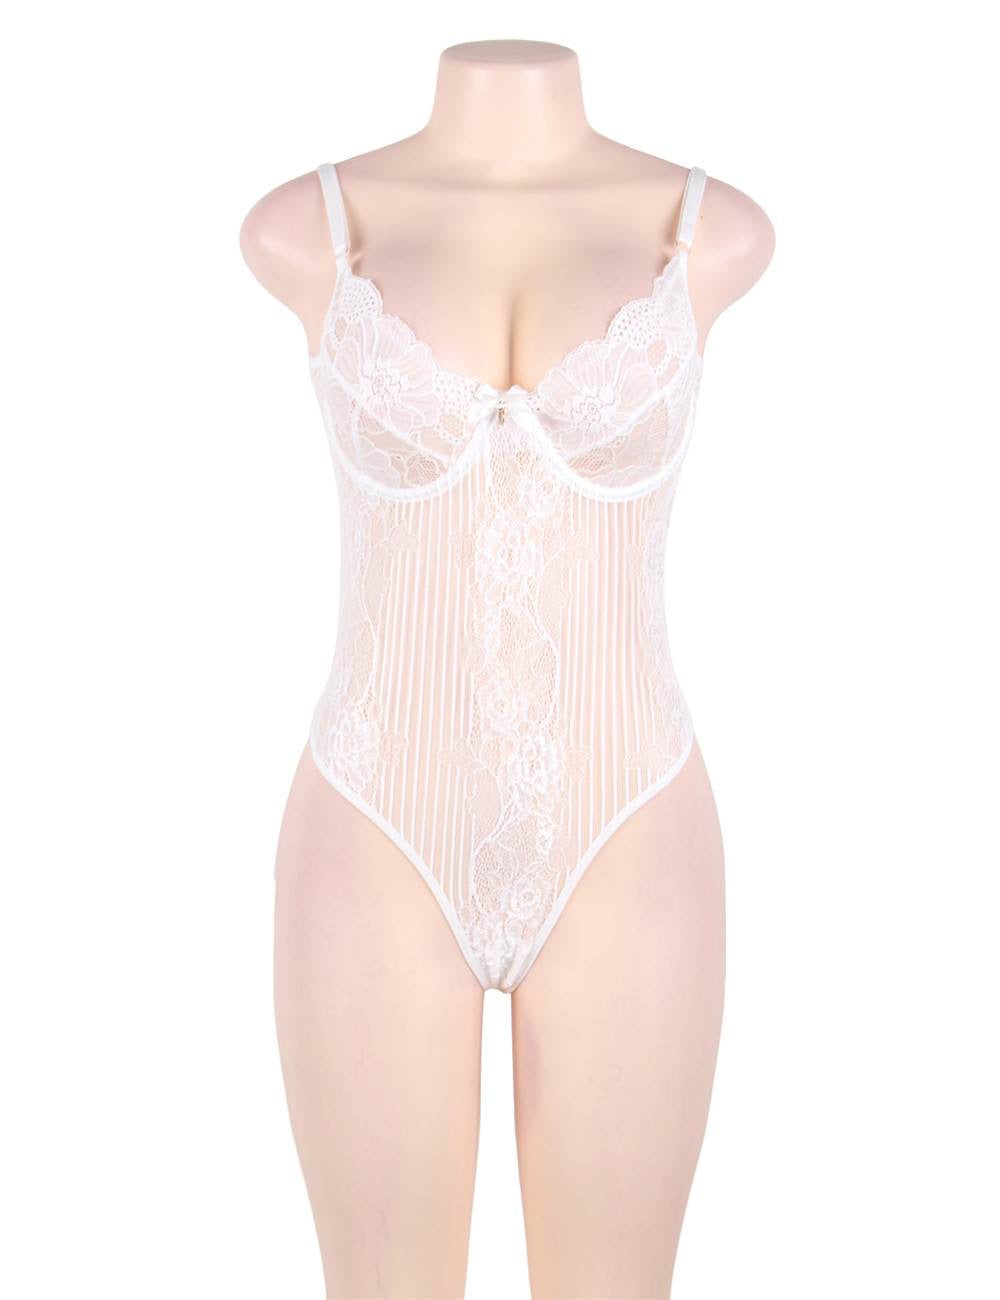 Bride To Be white bridal teddy and bodysuit with lace and sheer detail and adjustable straps. Edit alt text